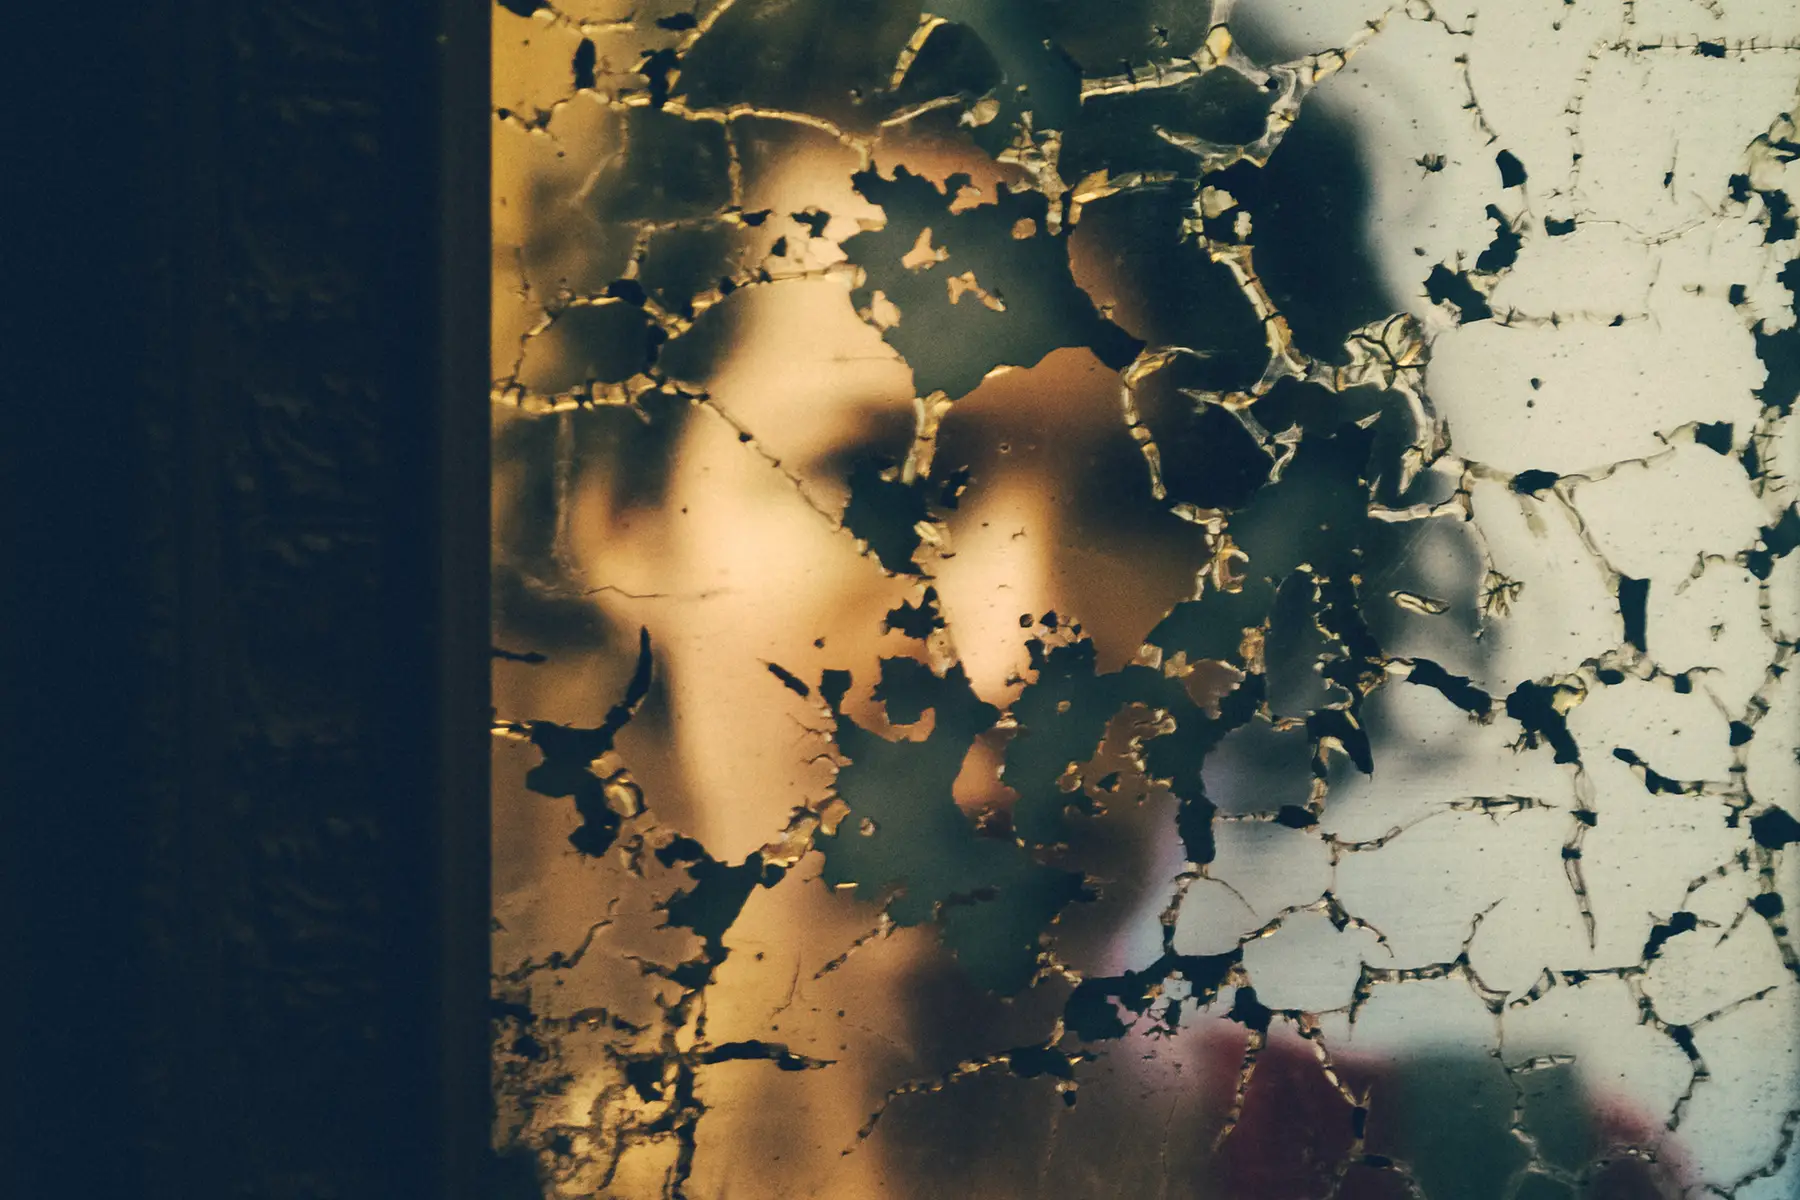 Women's reflection in a damaged mirror